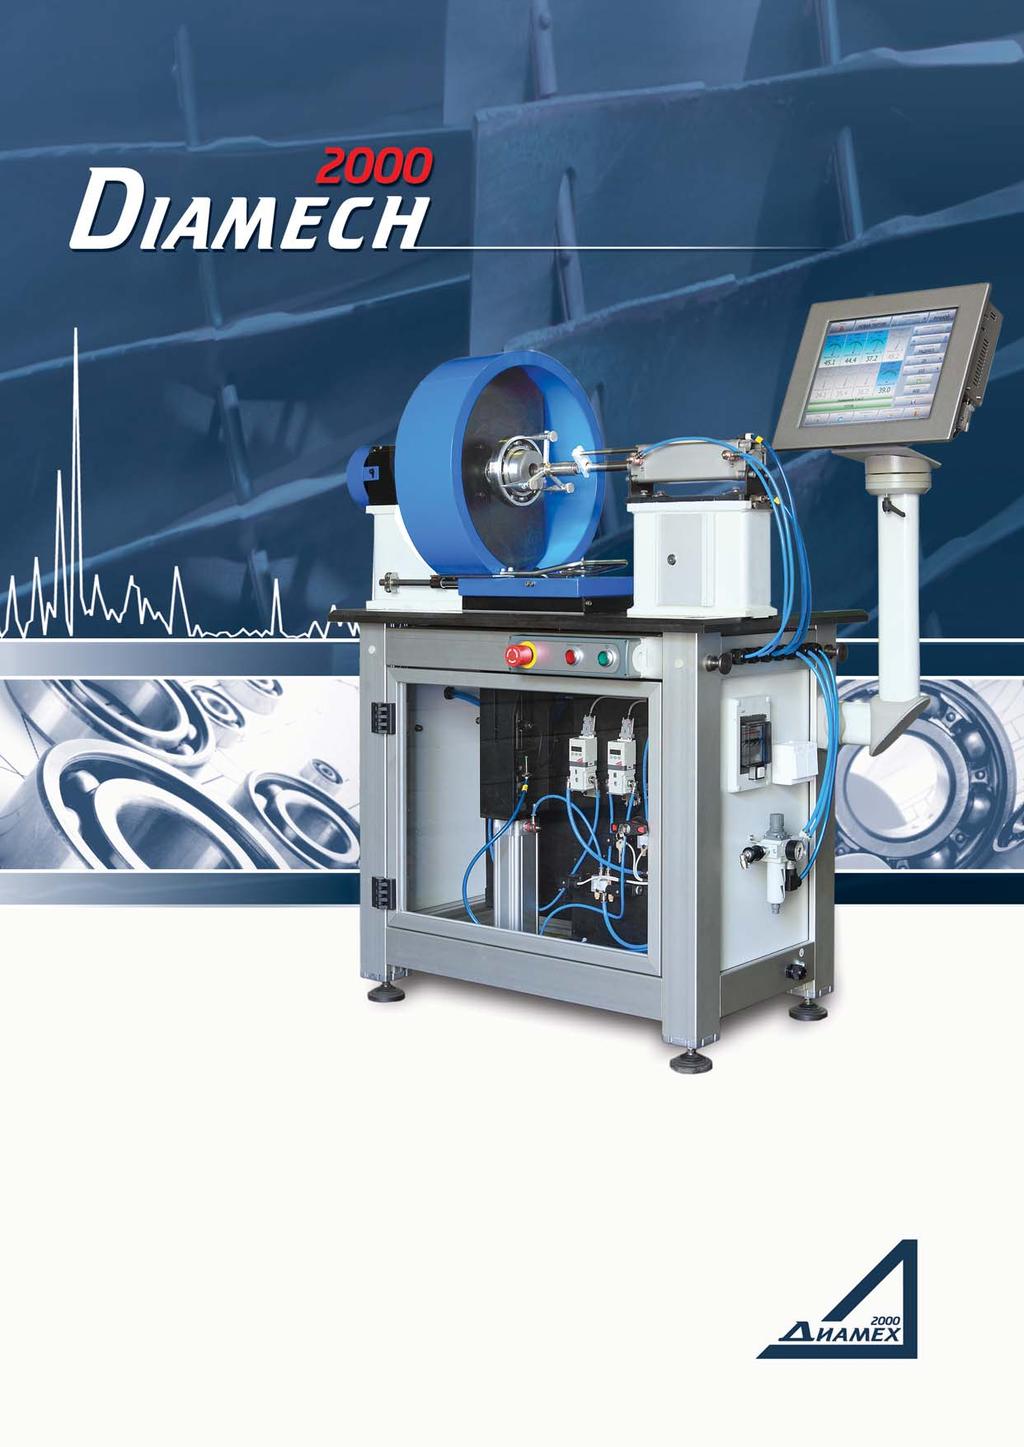 Vibration Diagnostics and Balancing Machines Rolling Element Bearing Testing Machine SP-180M Designed for validation of design data of rolling element bearings through actual testing